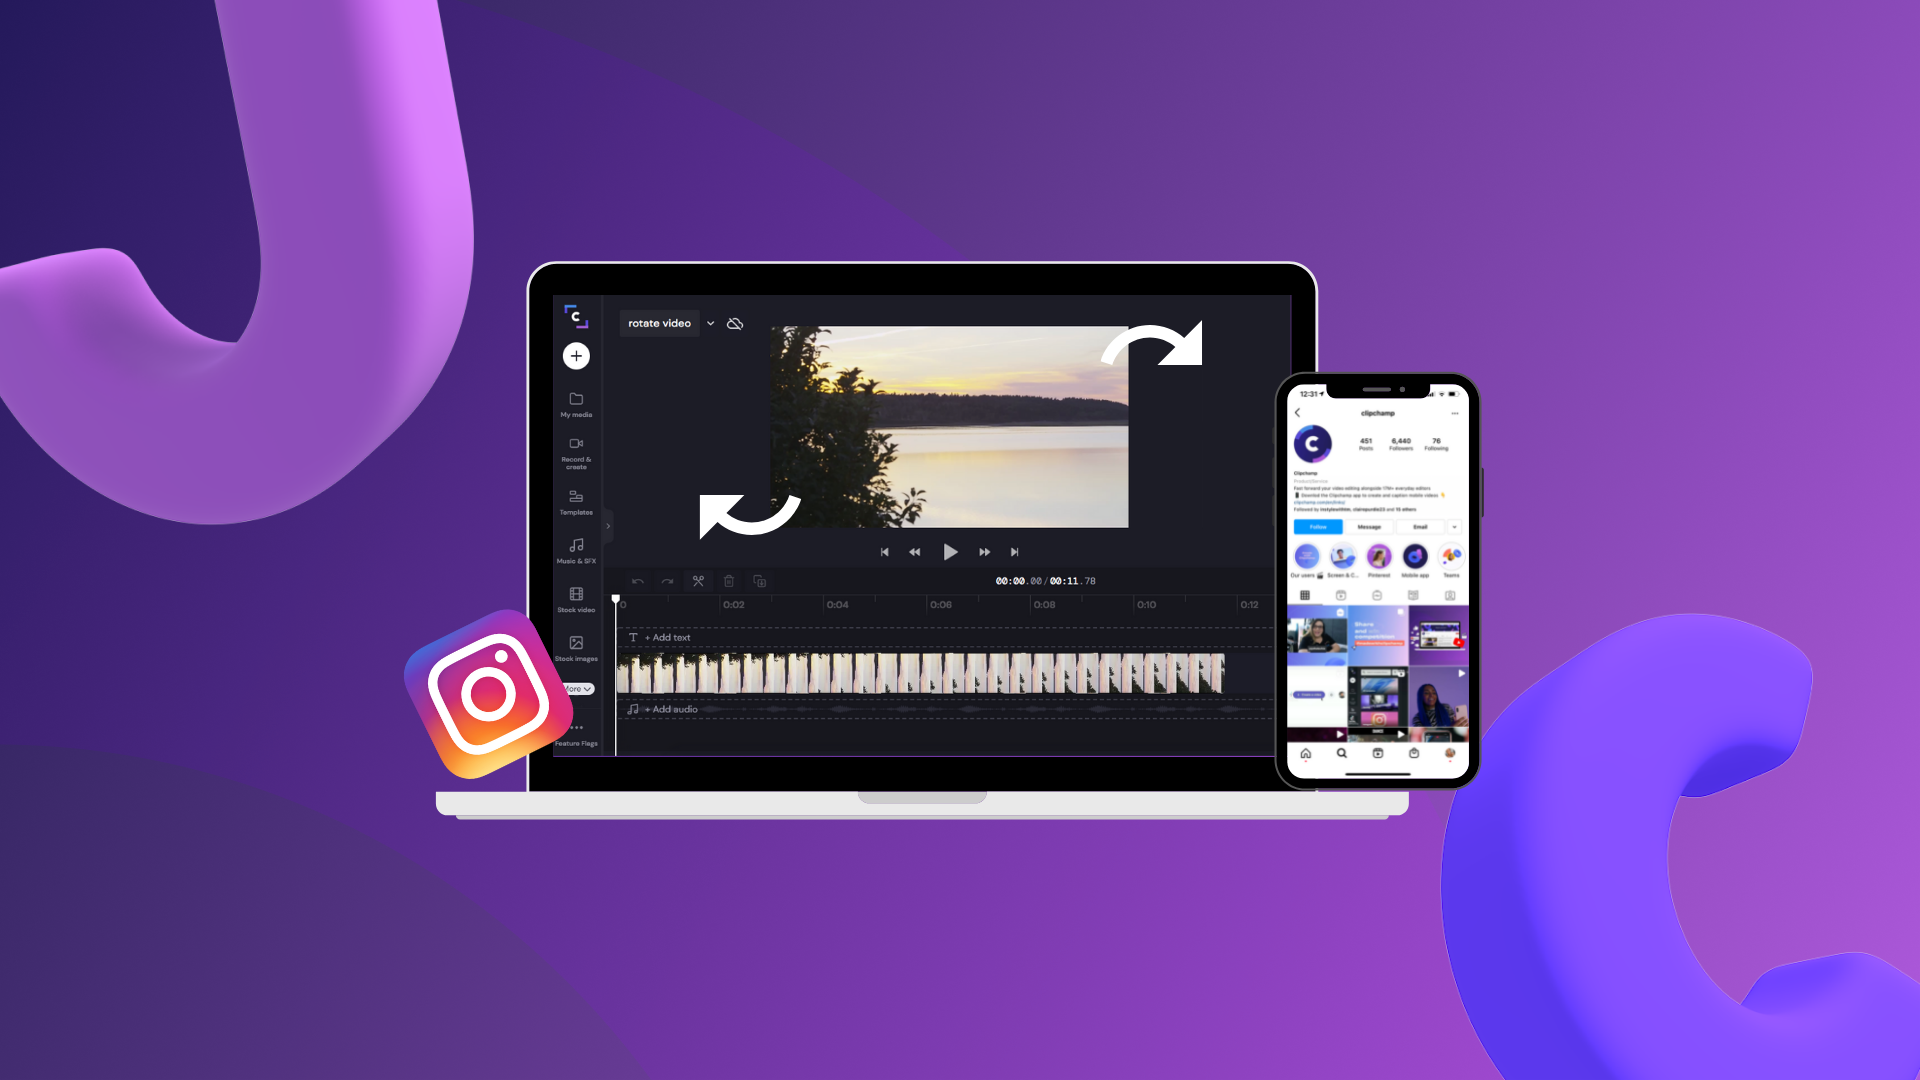 share video from google drive to instagram